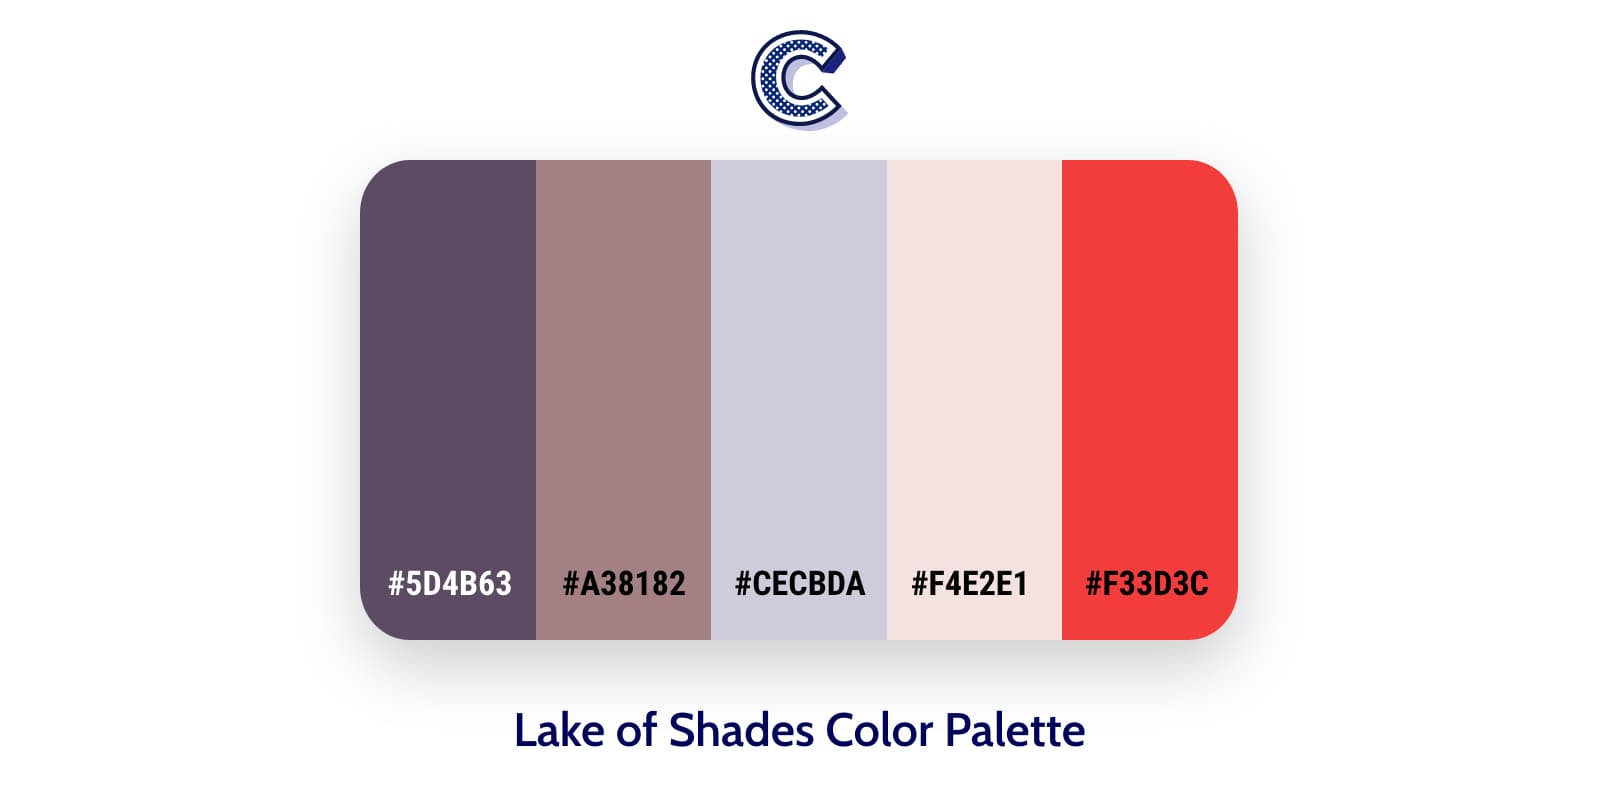 the featured image of lake of shades color palette